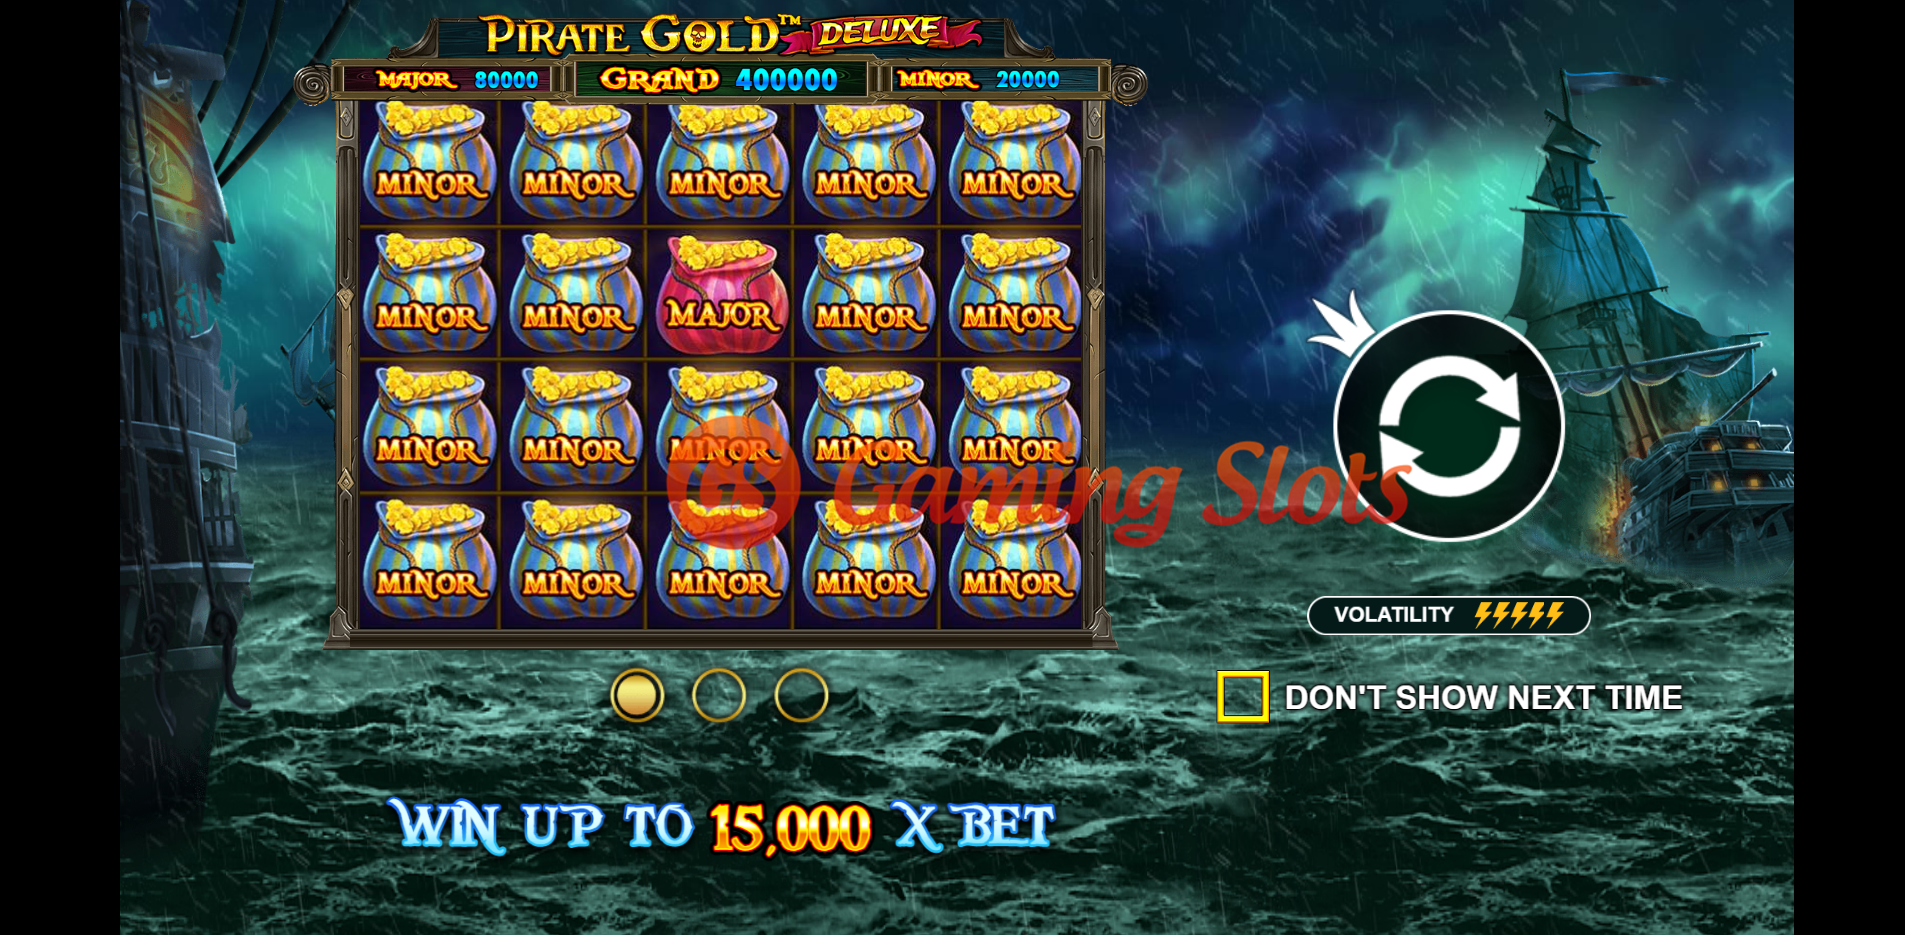 Game Intro for Pirate Gold Deluxe slot by Pragmatic Play